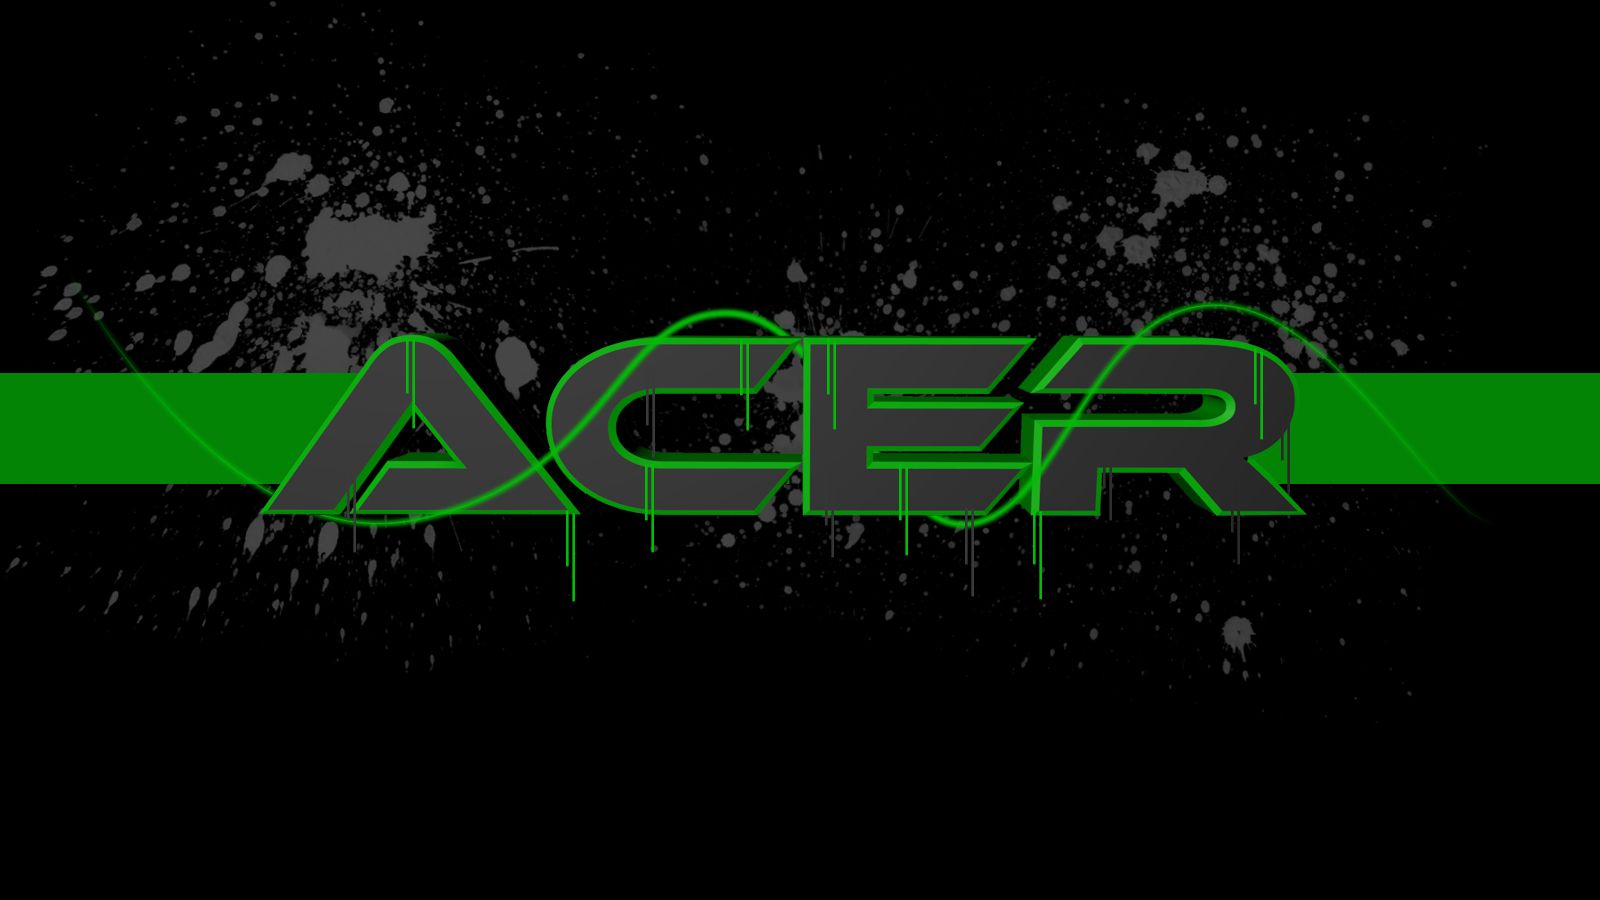 Acer Wallpapers 2015 - Wallpaper Cave